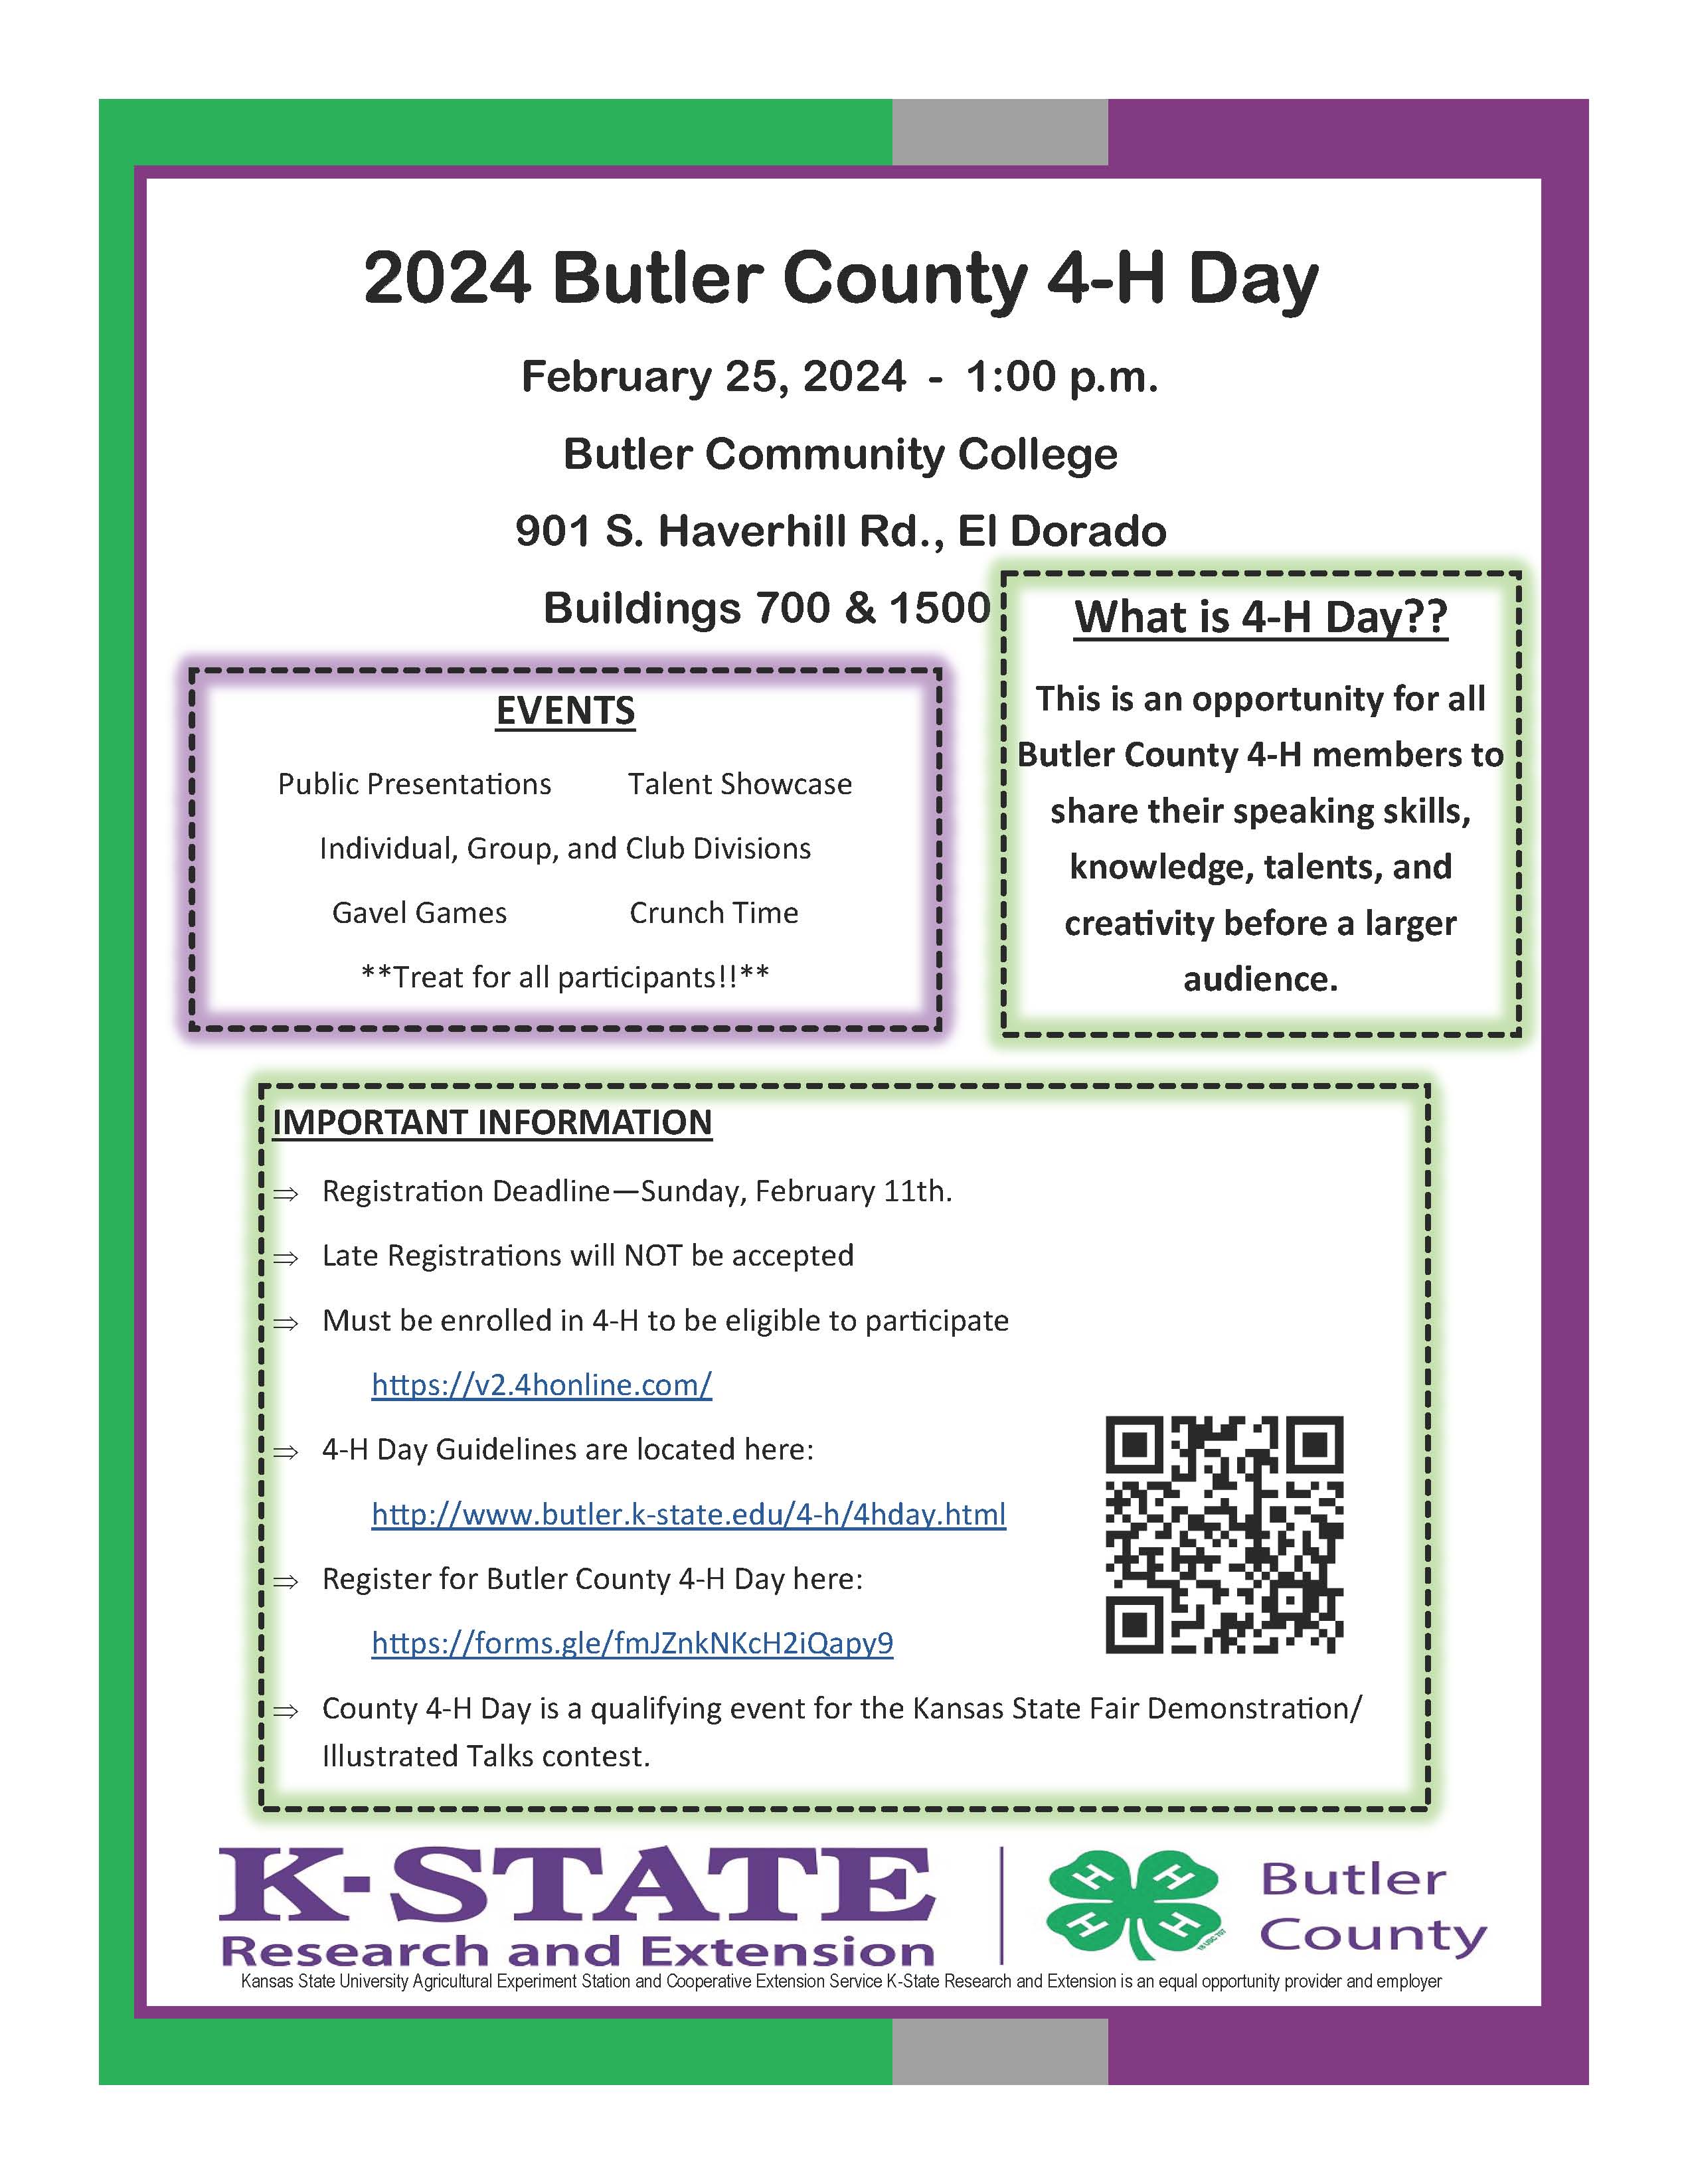 4-H day 2024